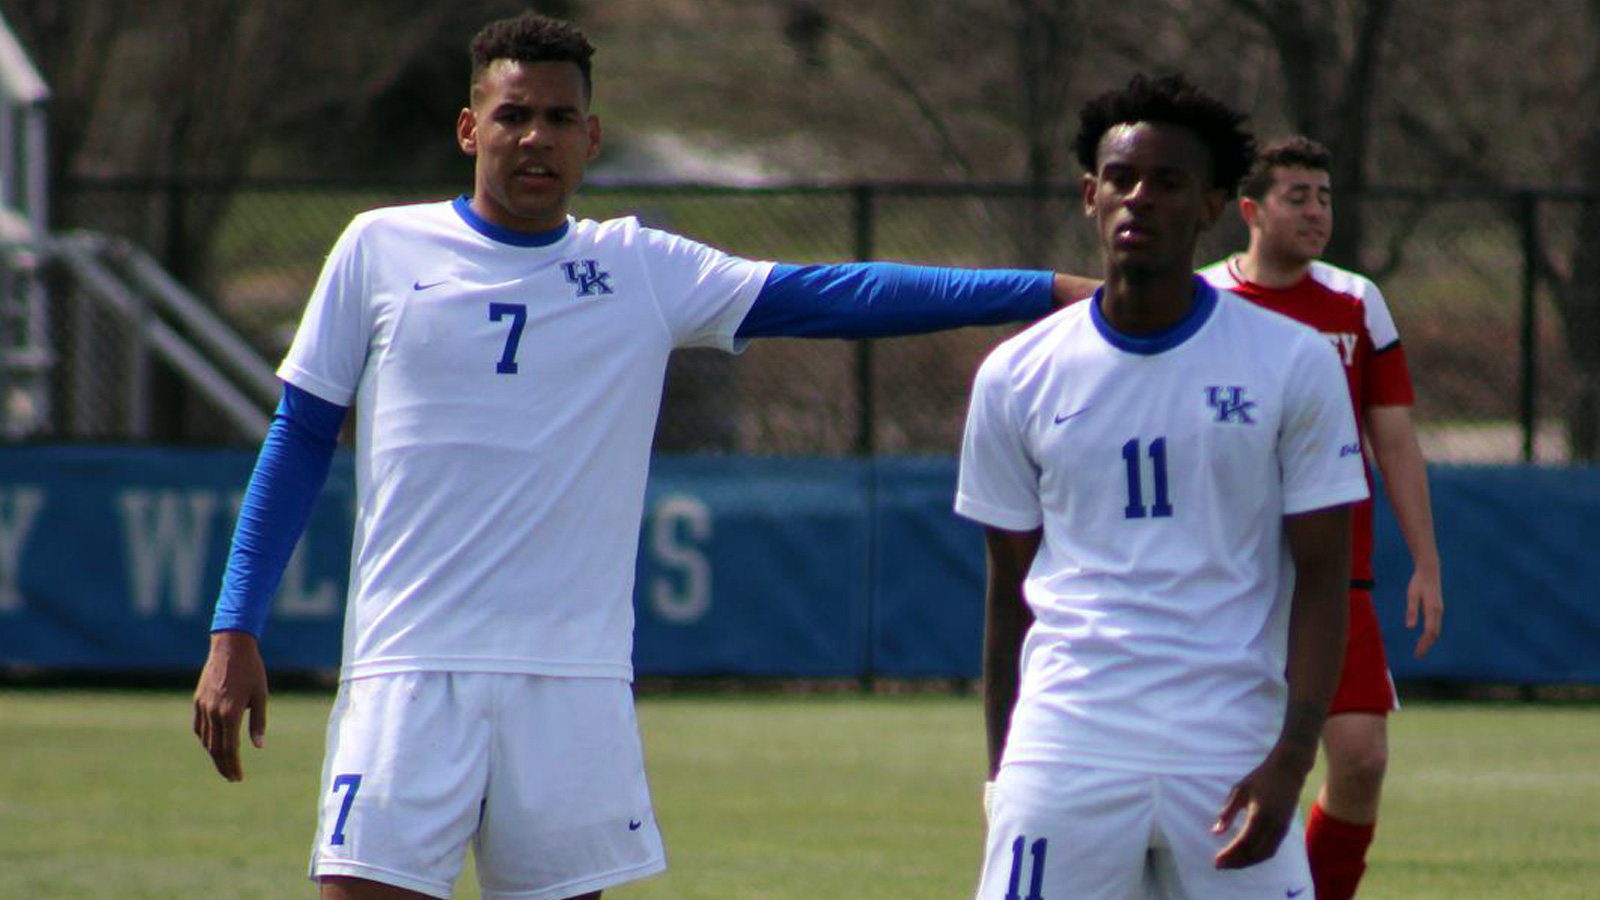 UK Men's Soccer's Saturday Spring Freindly Moved to Belmont